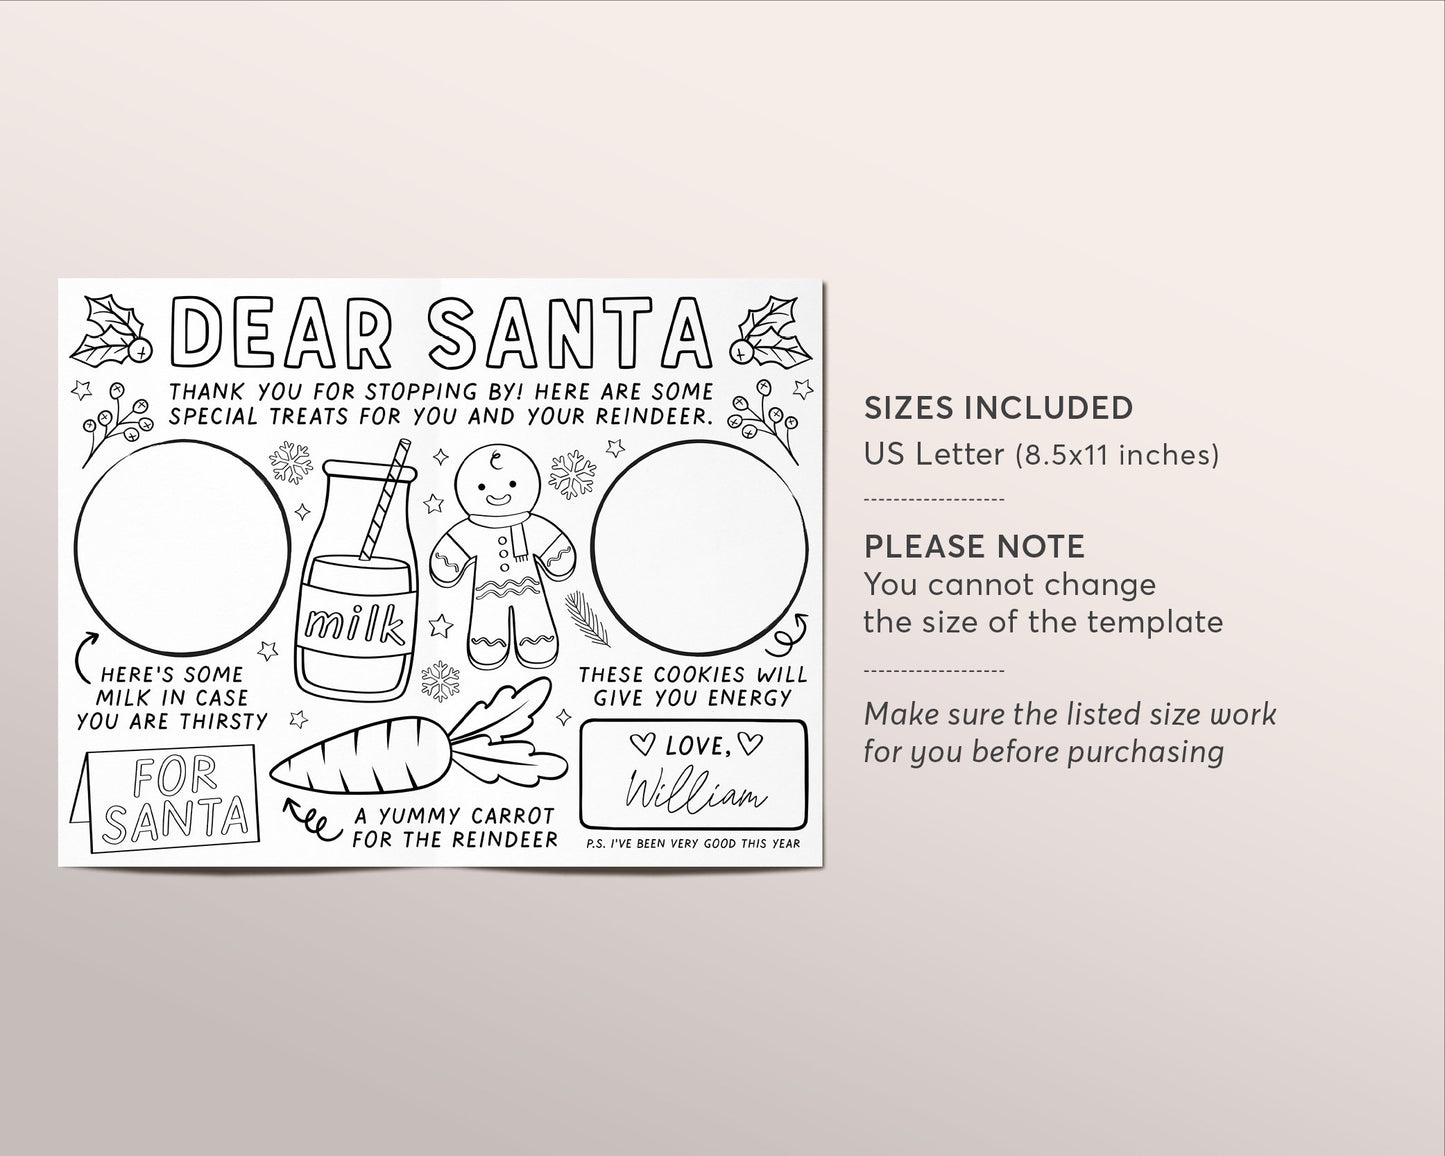 Santa Cookie Tray Placemat Editable Template, Cookies and Milk for Santa Coloring Page Sheet, Dear Santa Cookie Tray, Carrot For Reindeer